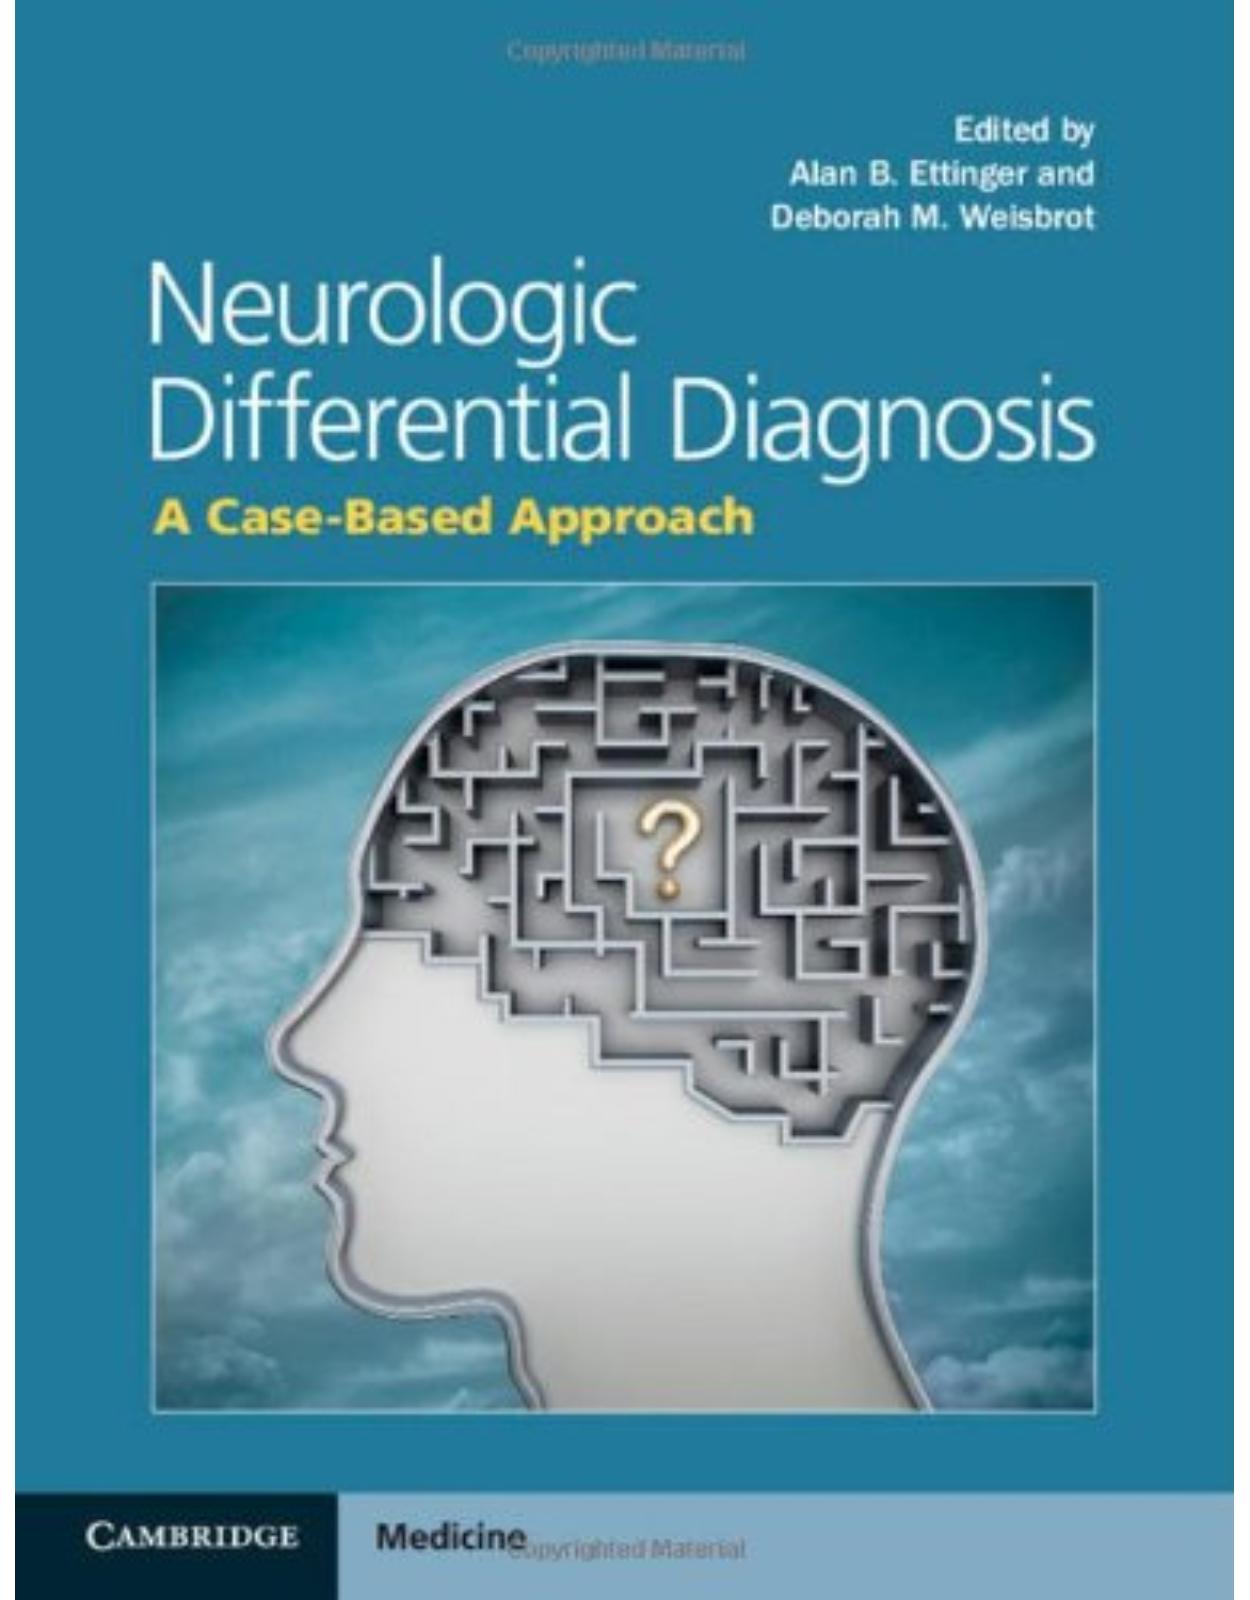 Neurologic Differential Diagnosis: A Case-Based Approach